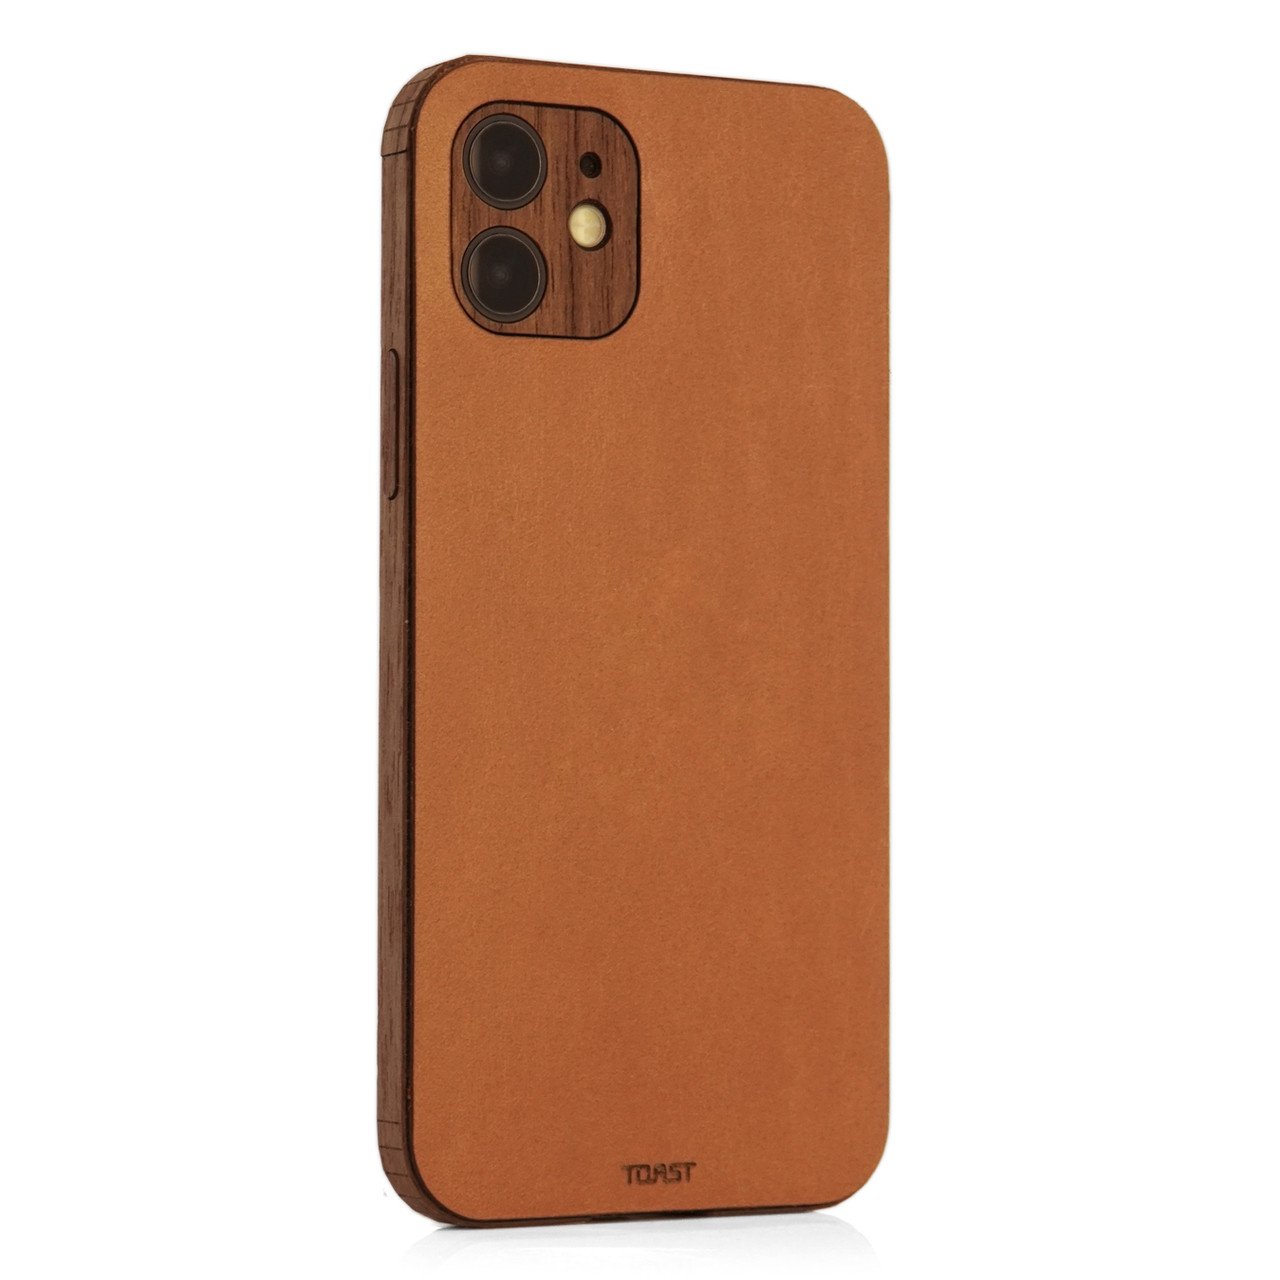 Leather and Wood Combo Cover for iPhone 12, mini, 12 Pro, 12 Pro Max, Toast